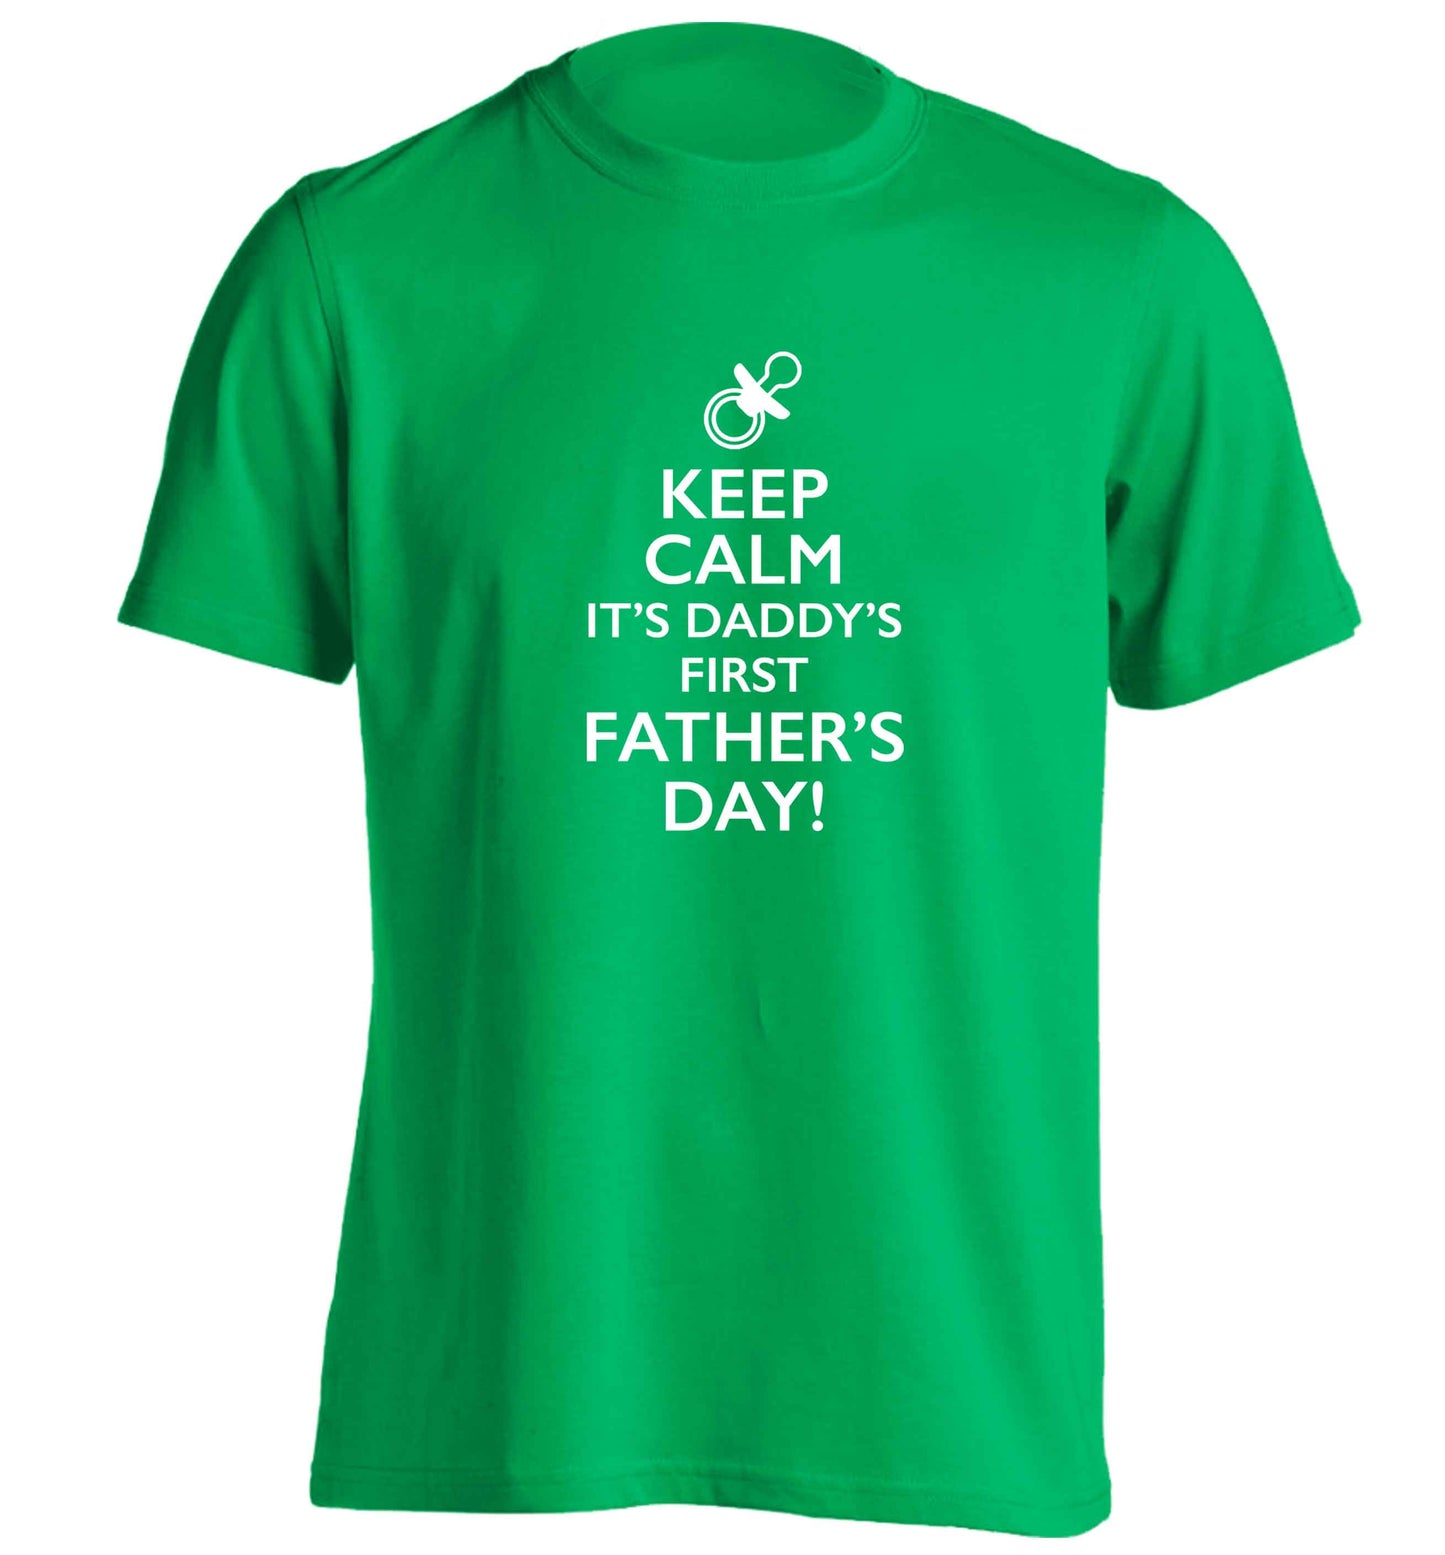 Keep calm it's daddys first father's day adults unisex green Tshirt 2XL